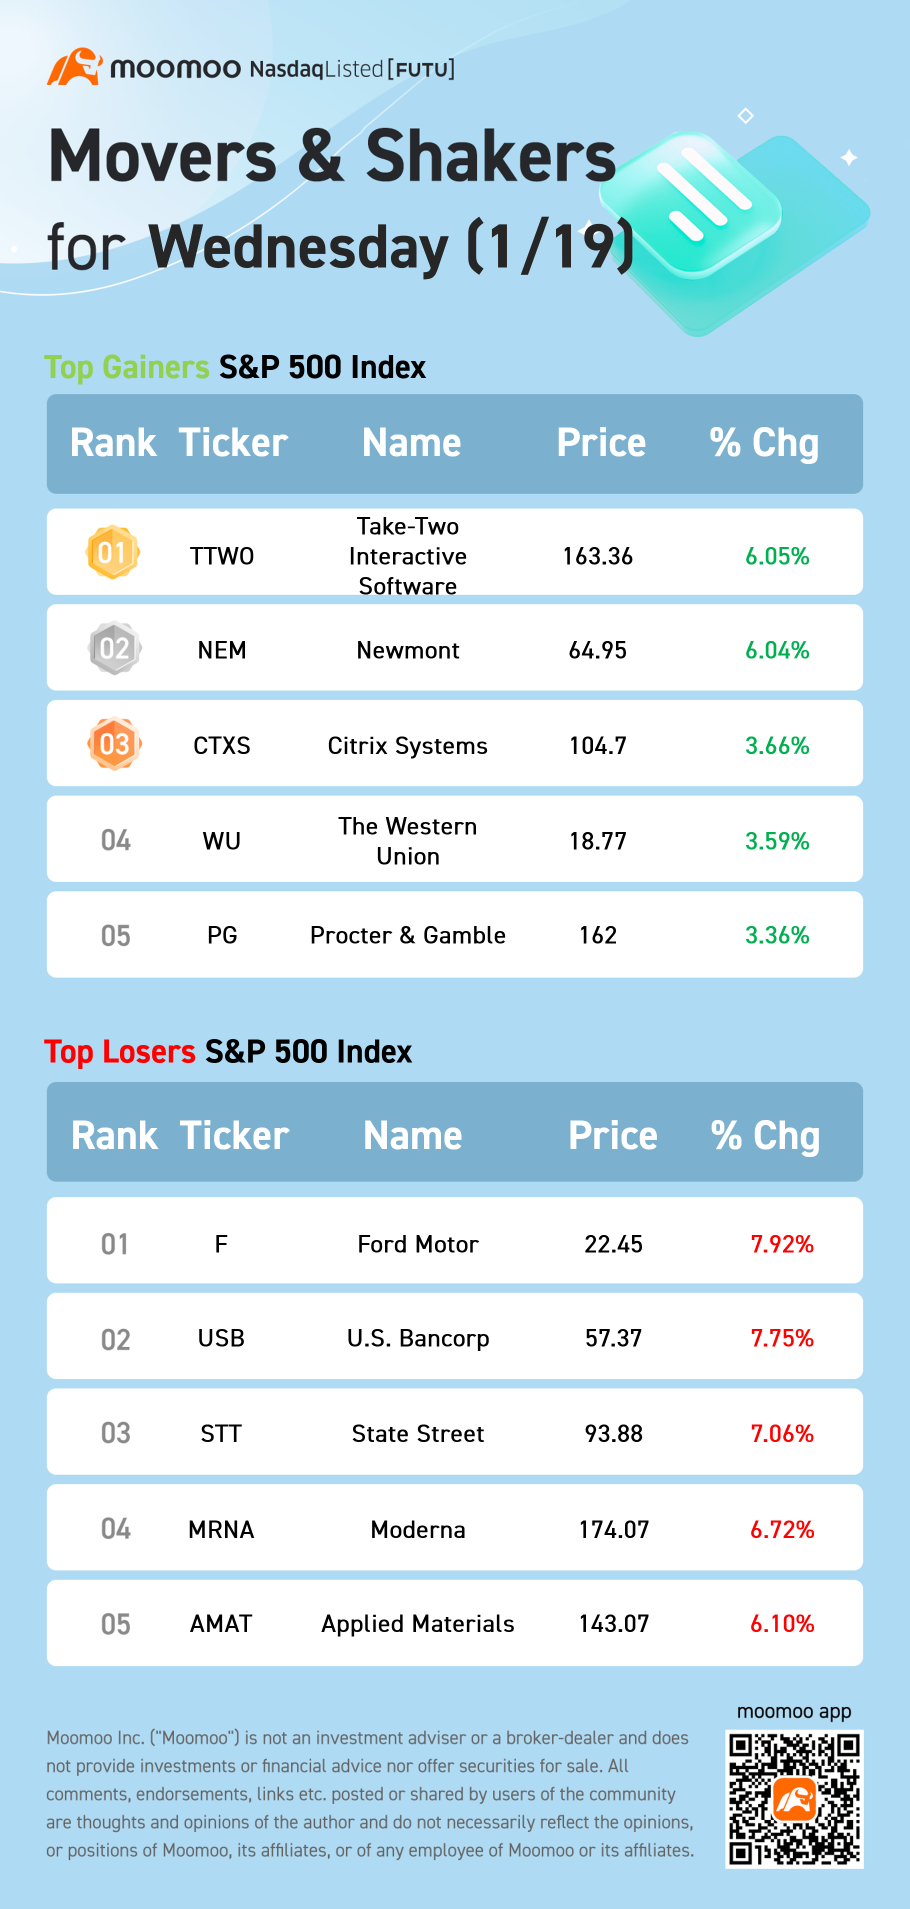 S&P 500 Movers for Wednesday (1/19)